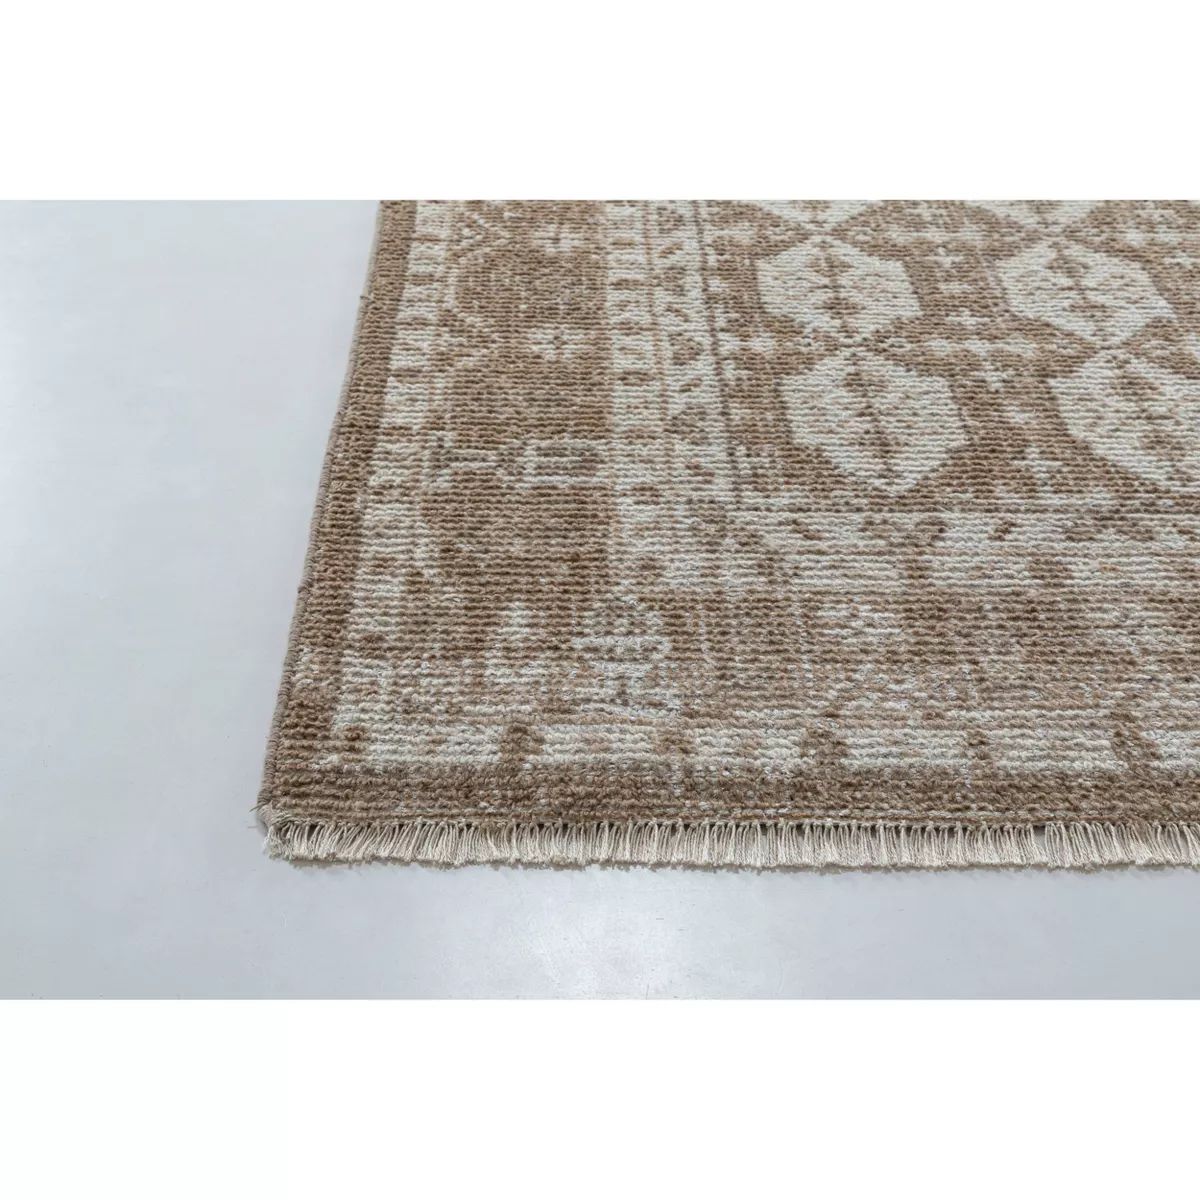 5'x7' Hand Knotted Persian Style Tile Rug Beige - Threshold™ designed with Studio McGee | Target